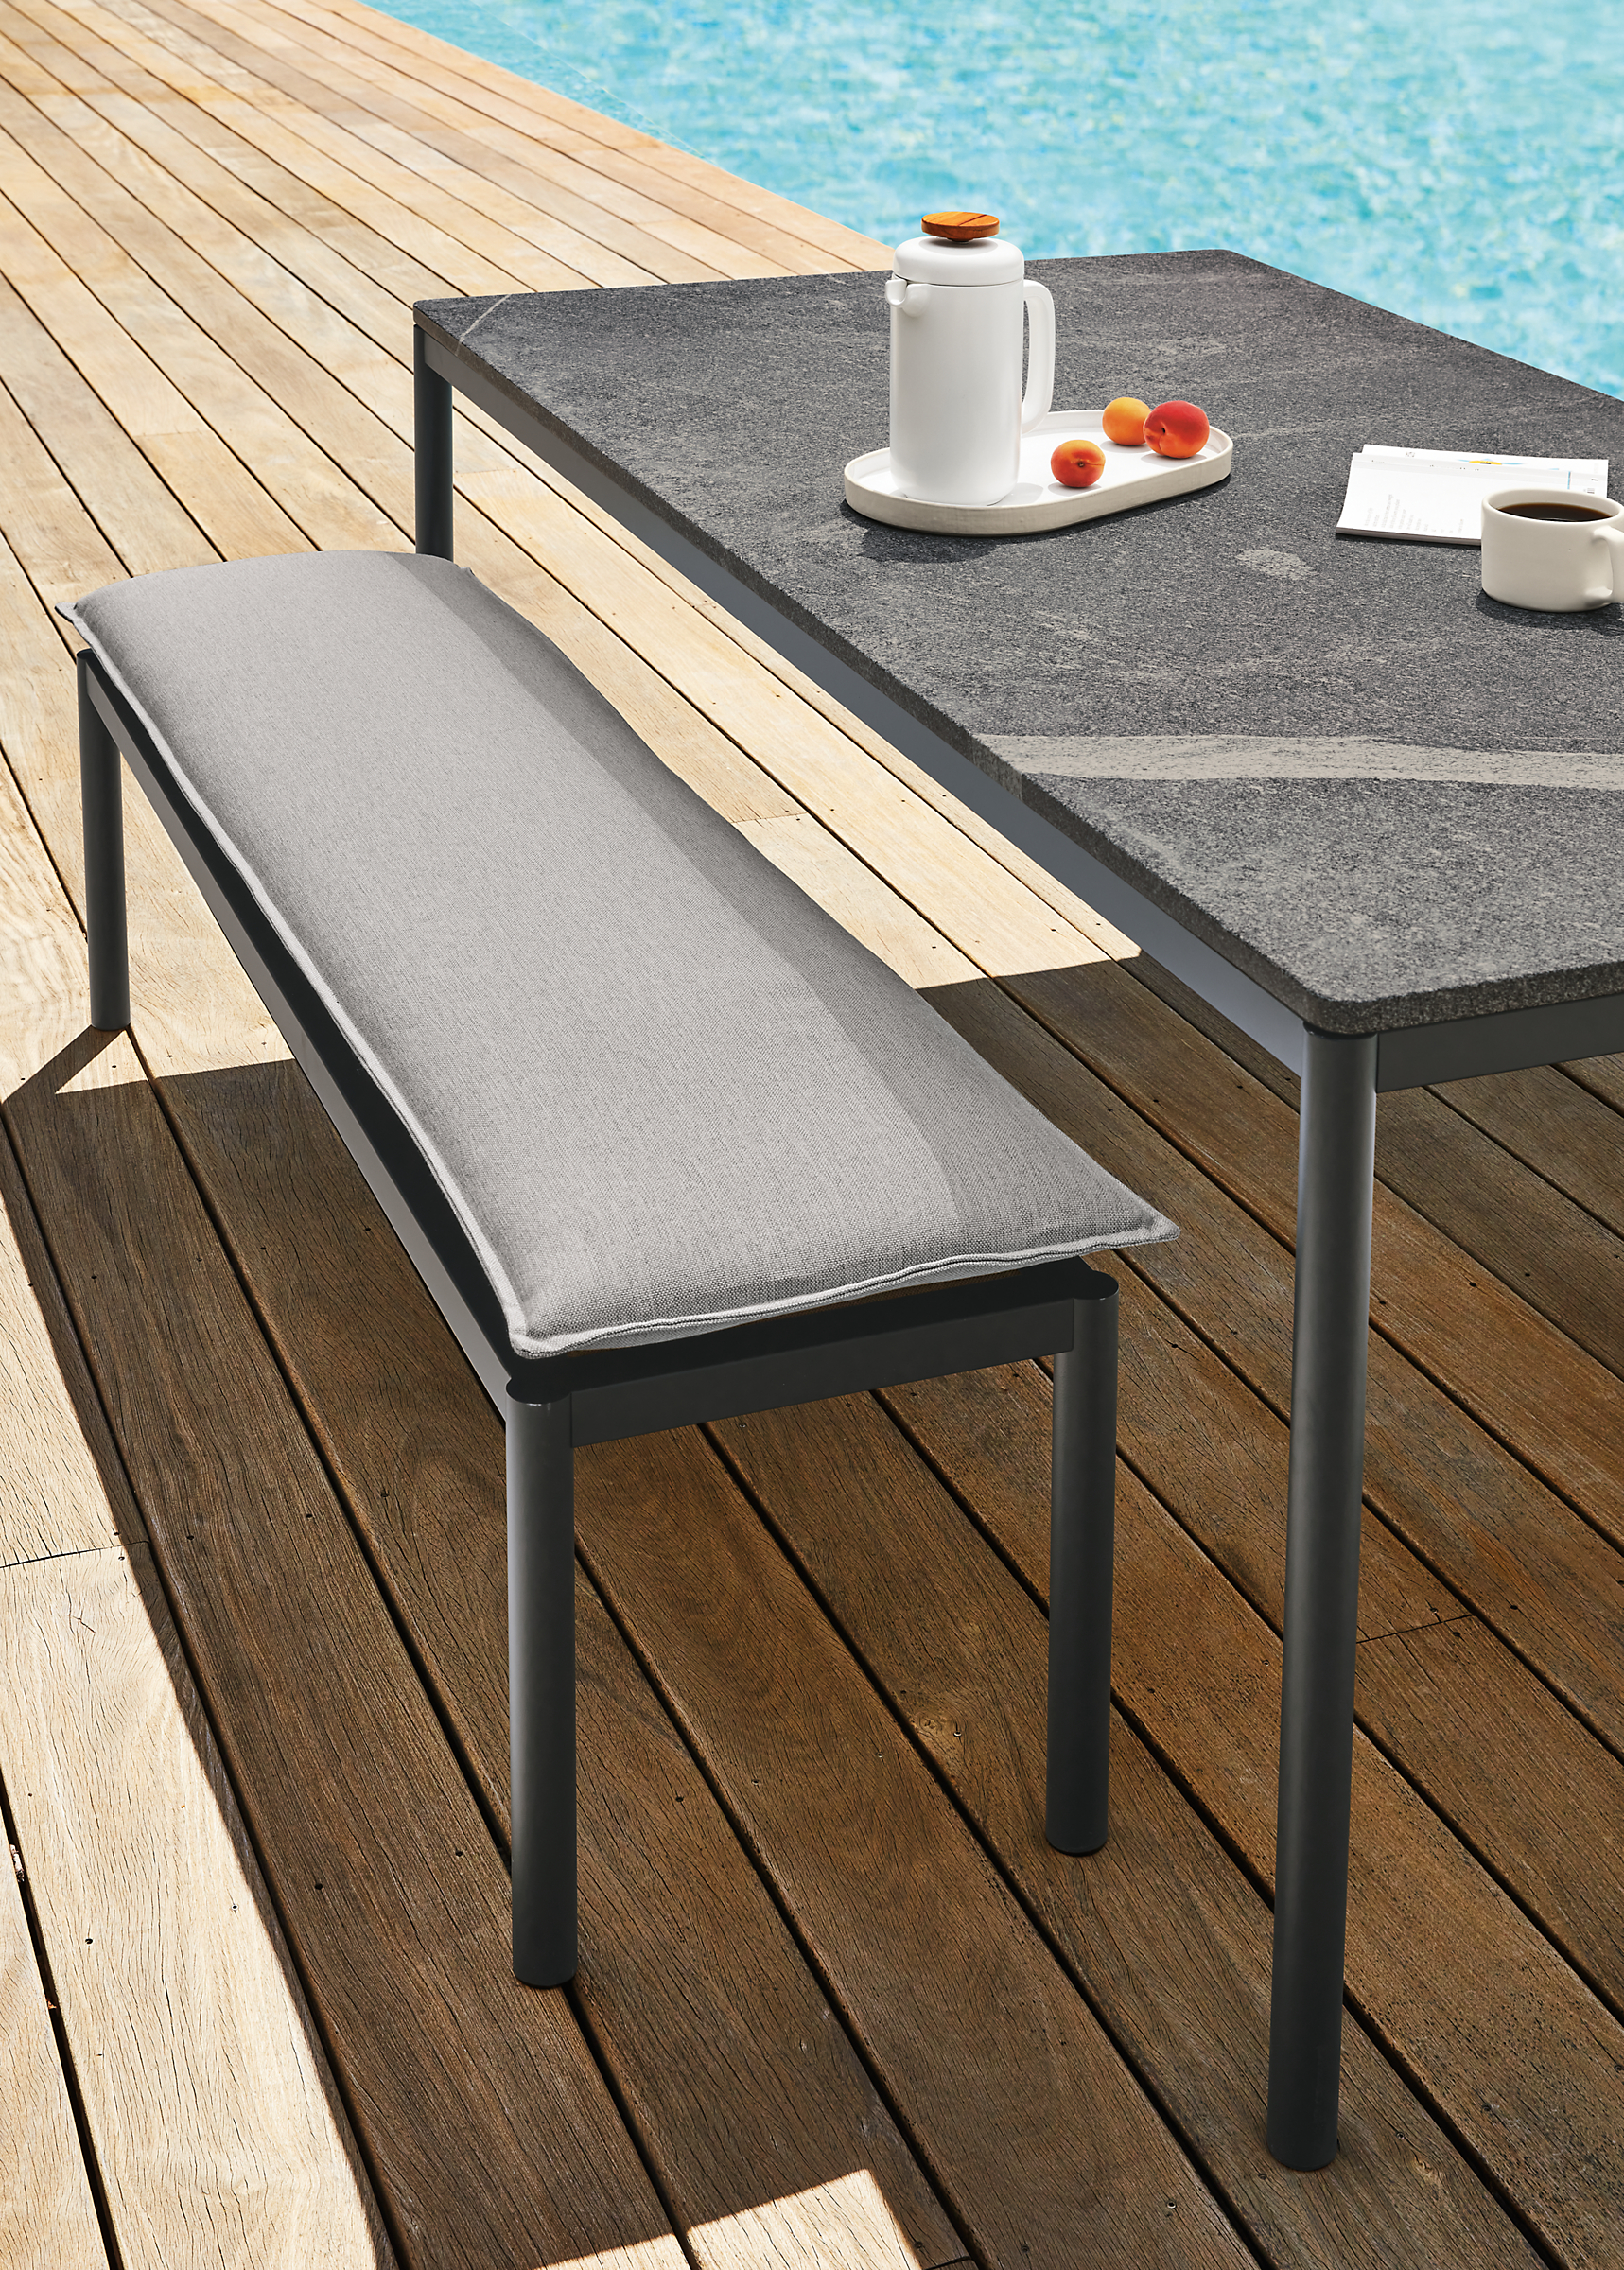 Westbrook outdoor table and bench in graphite with Pelham smoke cushion and Elegant grey granite table top.